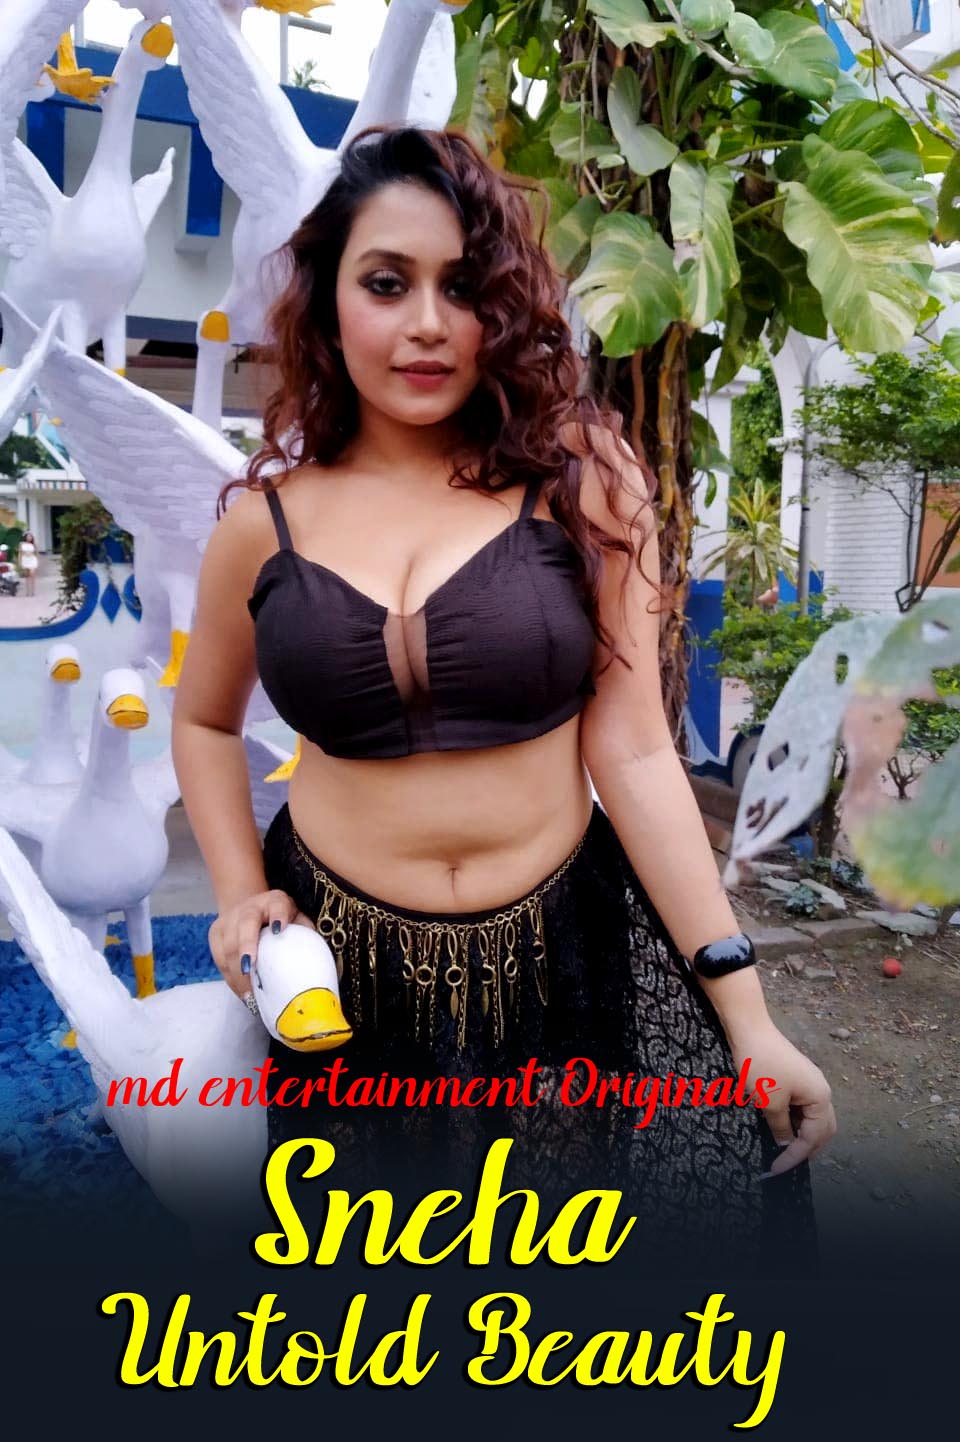 You are currently viewing Sneha Untold Beauty 2021 MD ENTERTAINMENT Fashion Hot Video 720p 480p HDRip 100MB 30MB Download & Watch Online